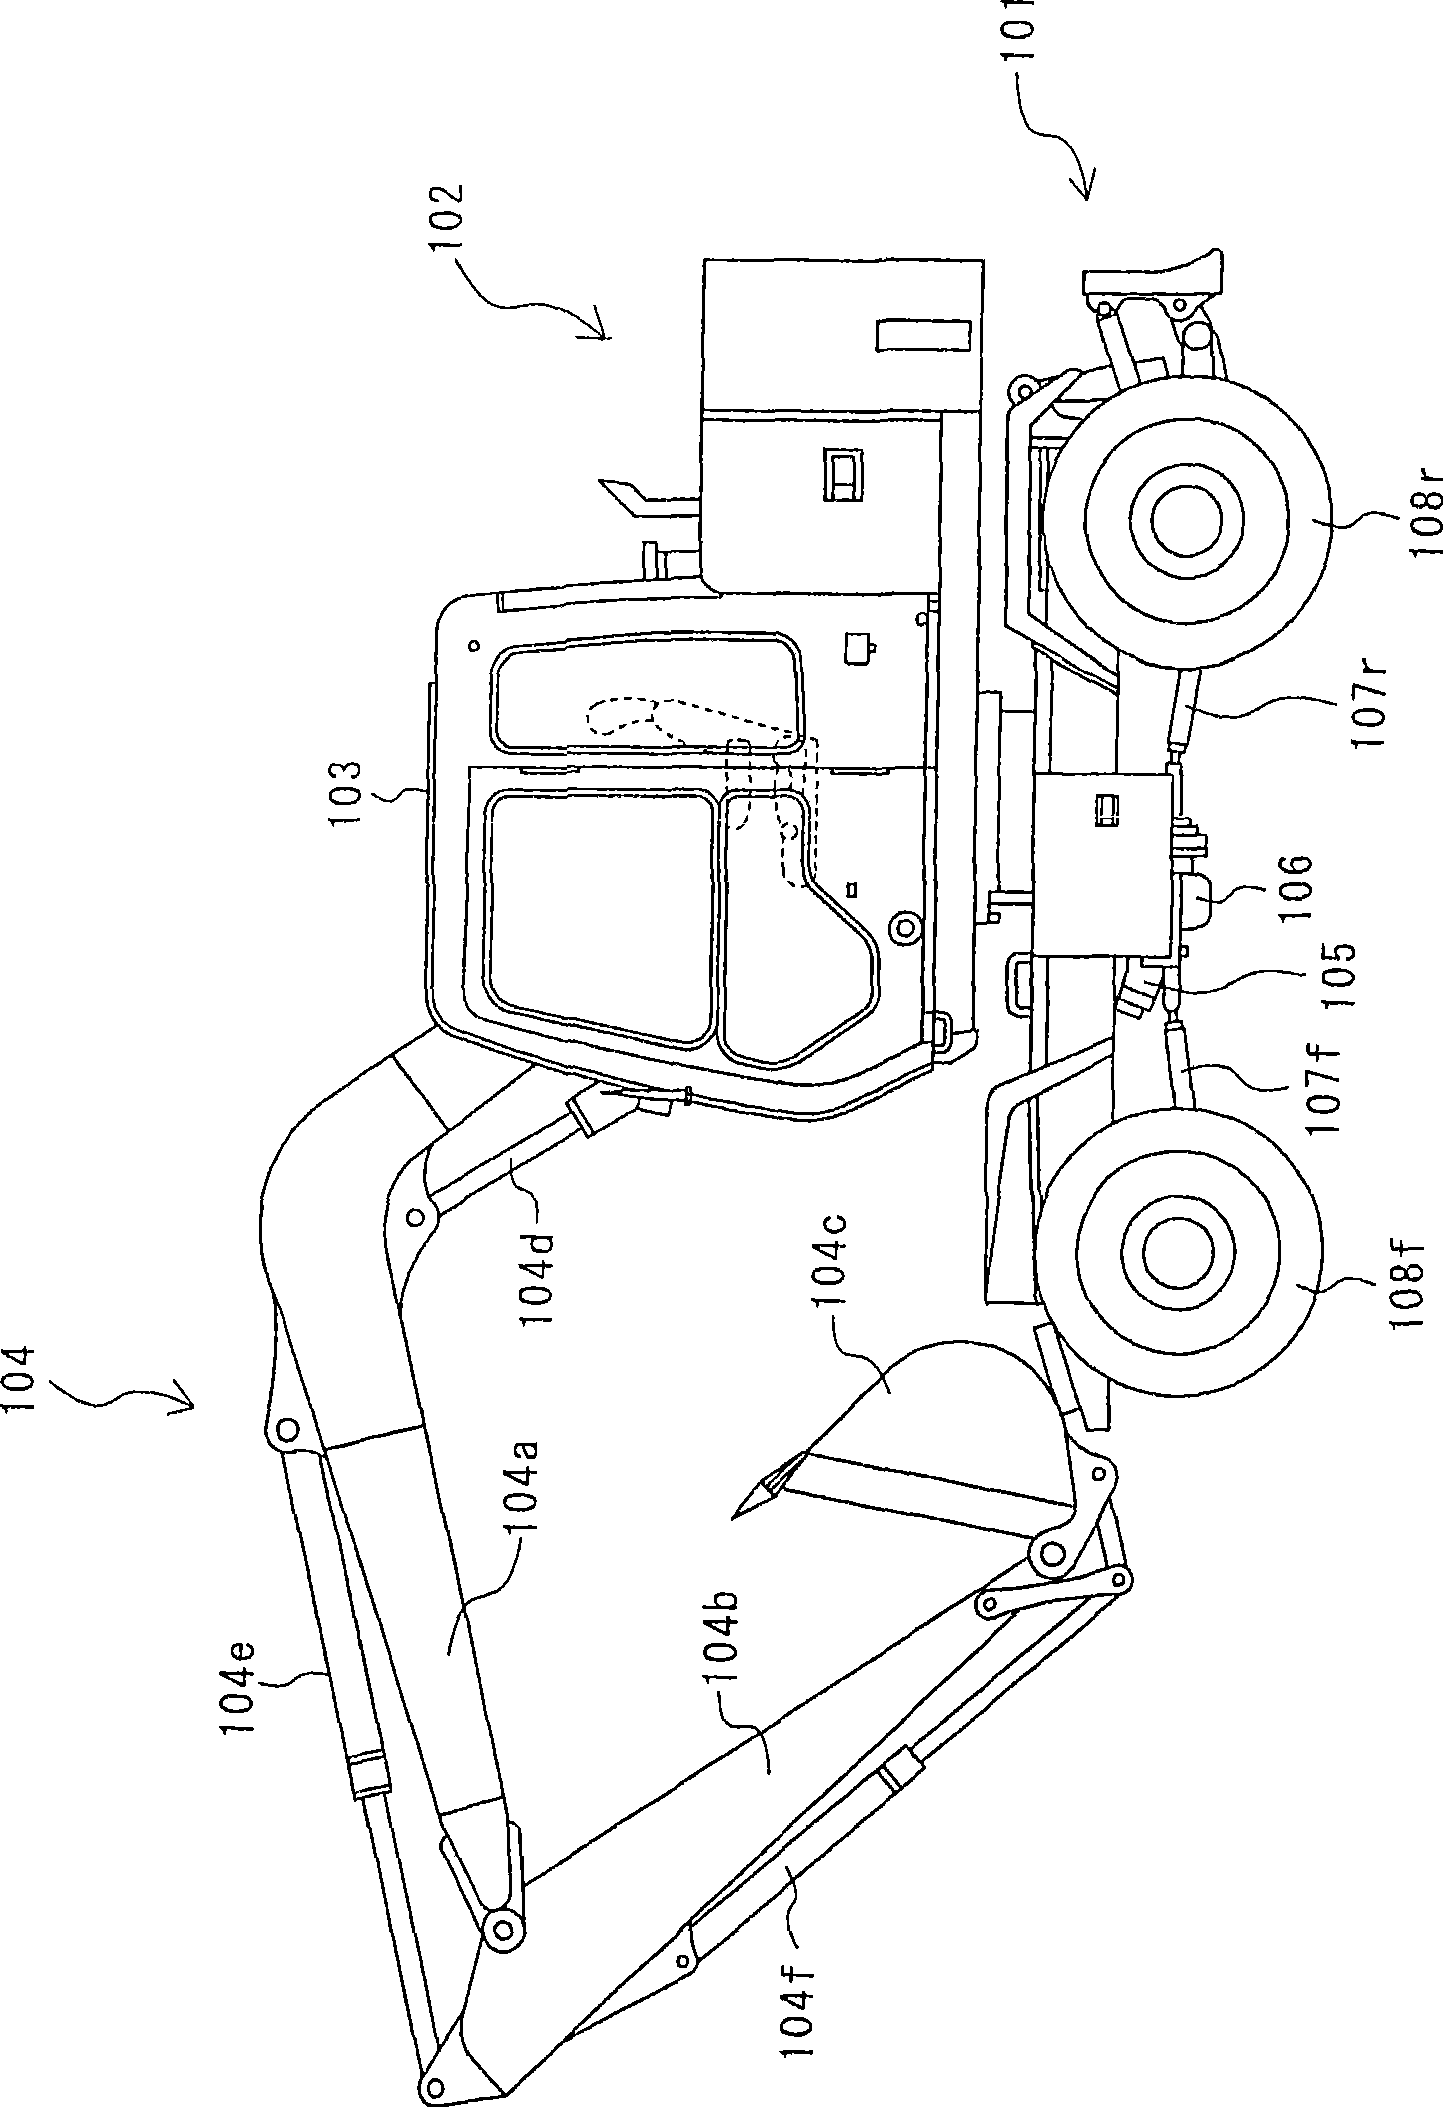 Travel control device for hydraulic traveling vehicle